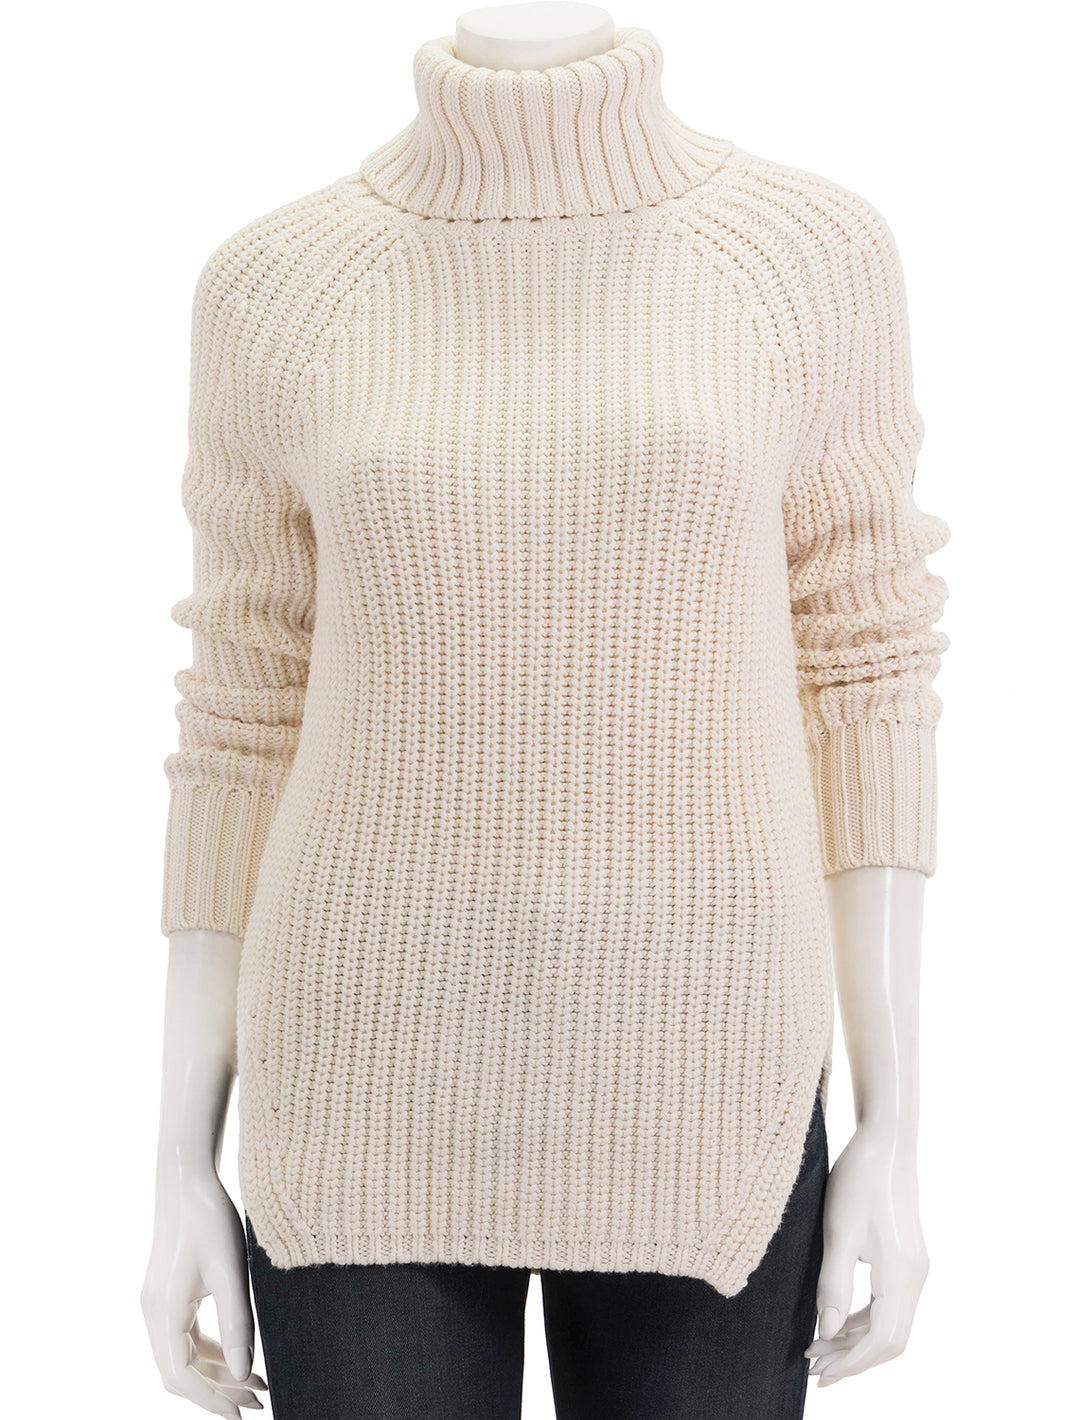 Front view of Alp N Rock's simone sweater in ivory.